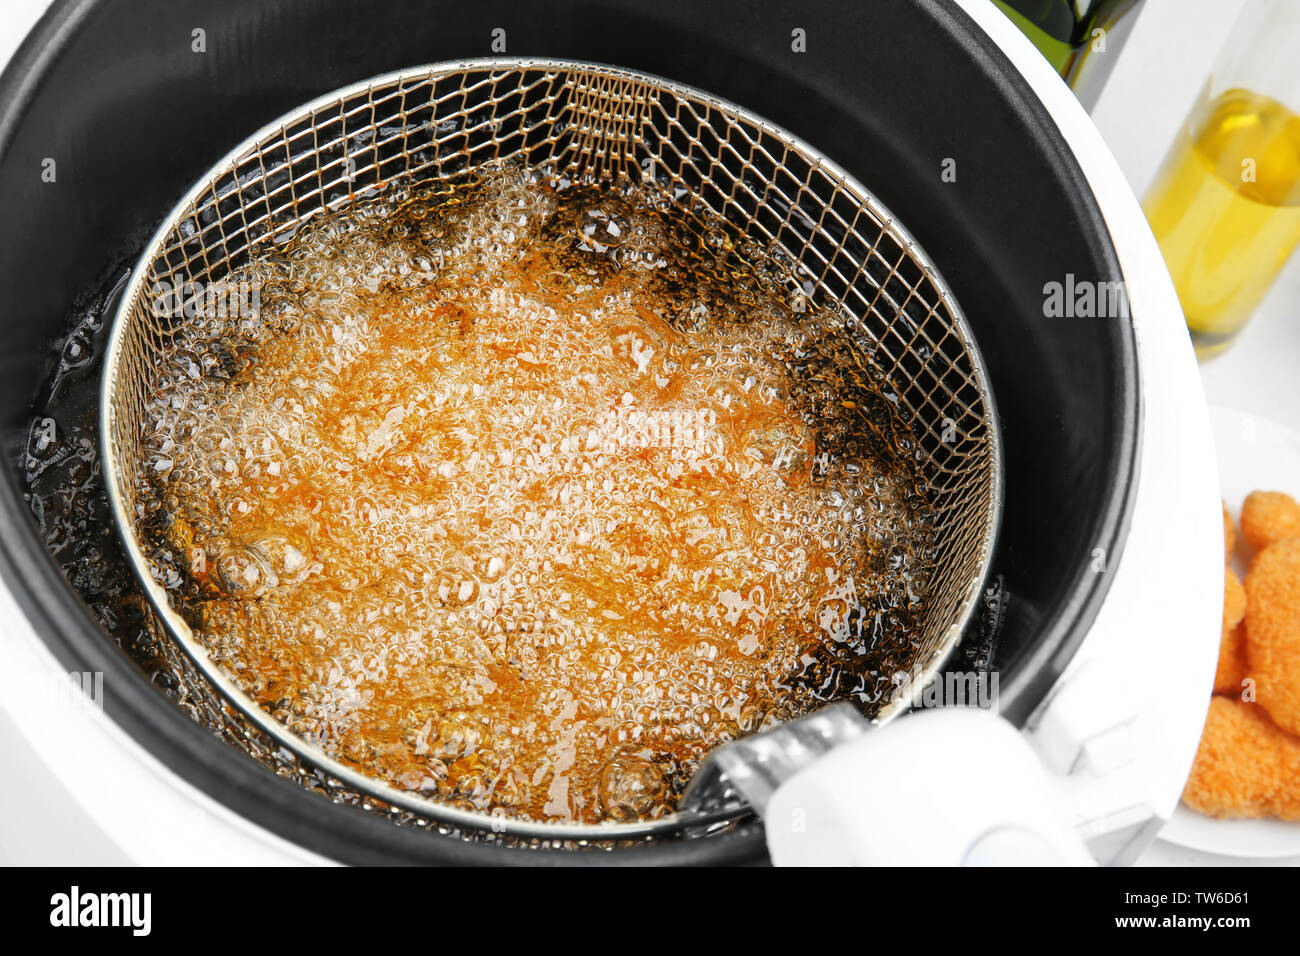 Deep Fryers With Boiling Oil Stock Photo - Download Image Now